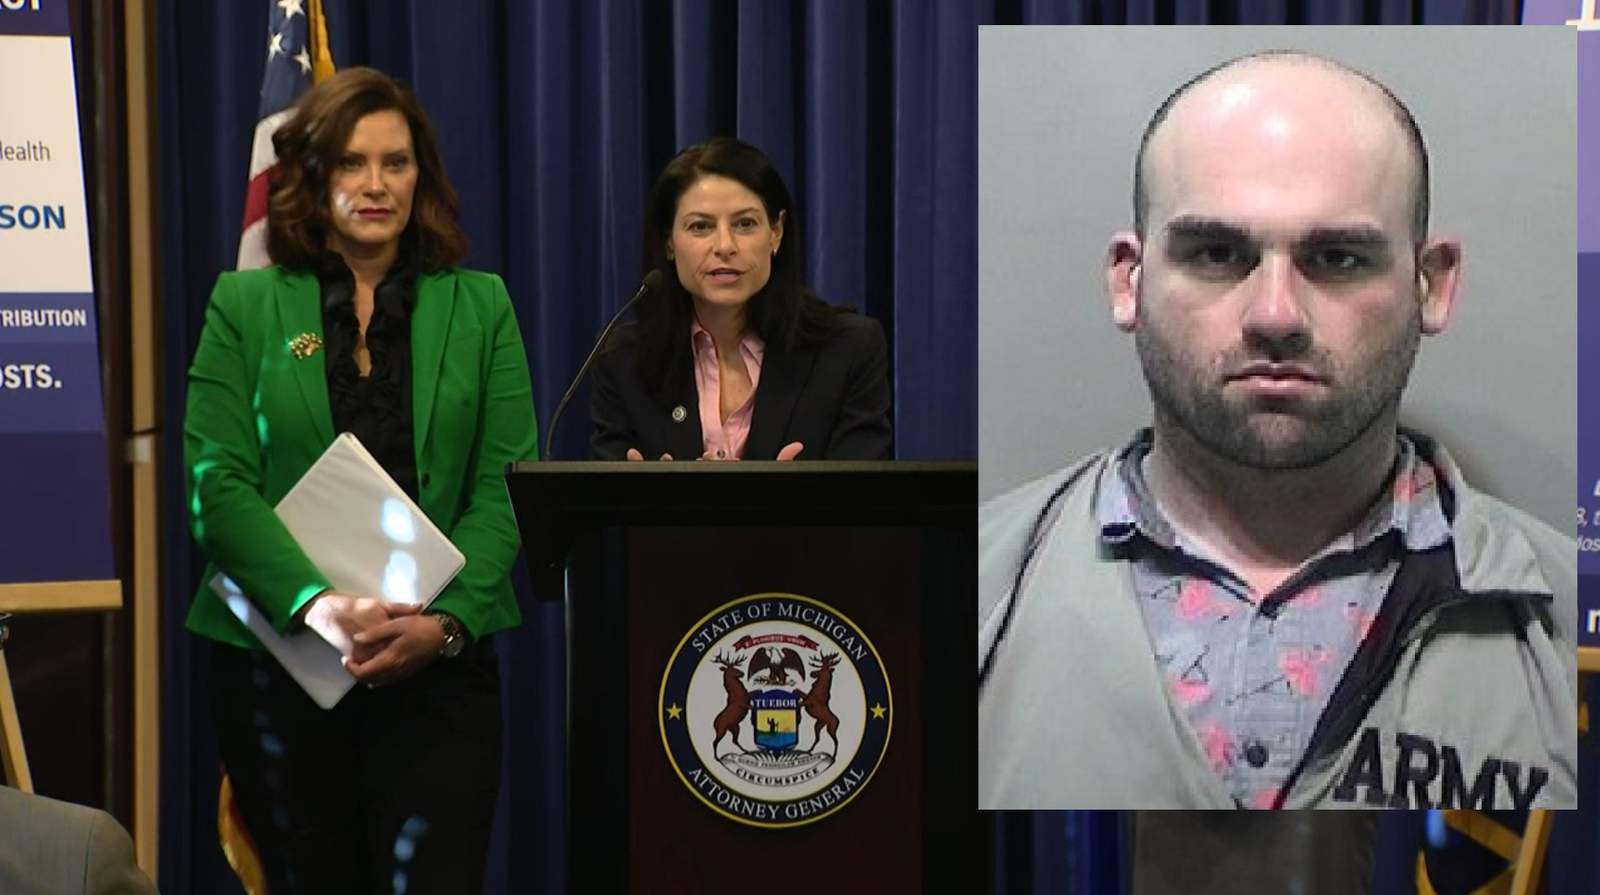 Detroit man charged with threatening to kill Gov. Gretchen Whitmer, AG Dana Nessel